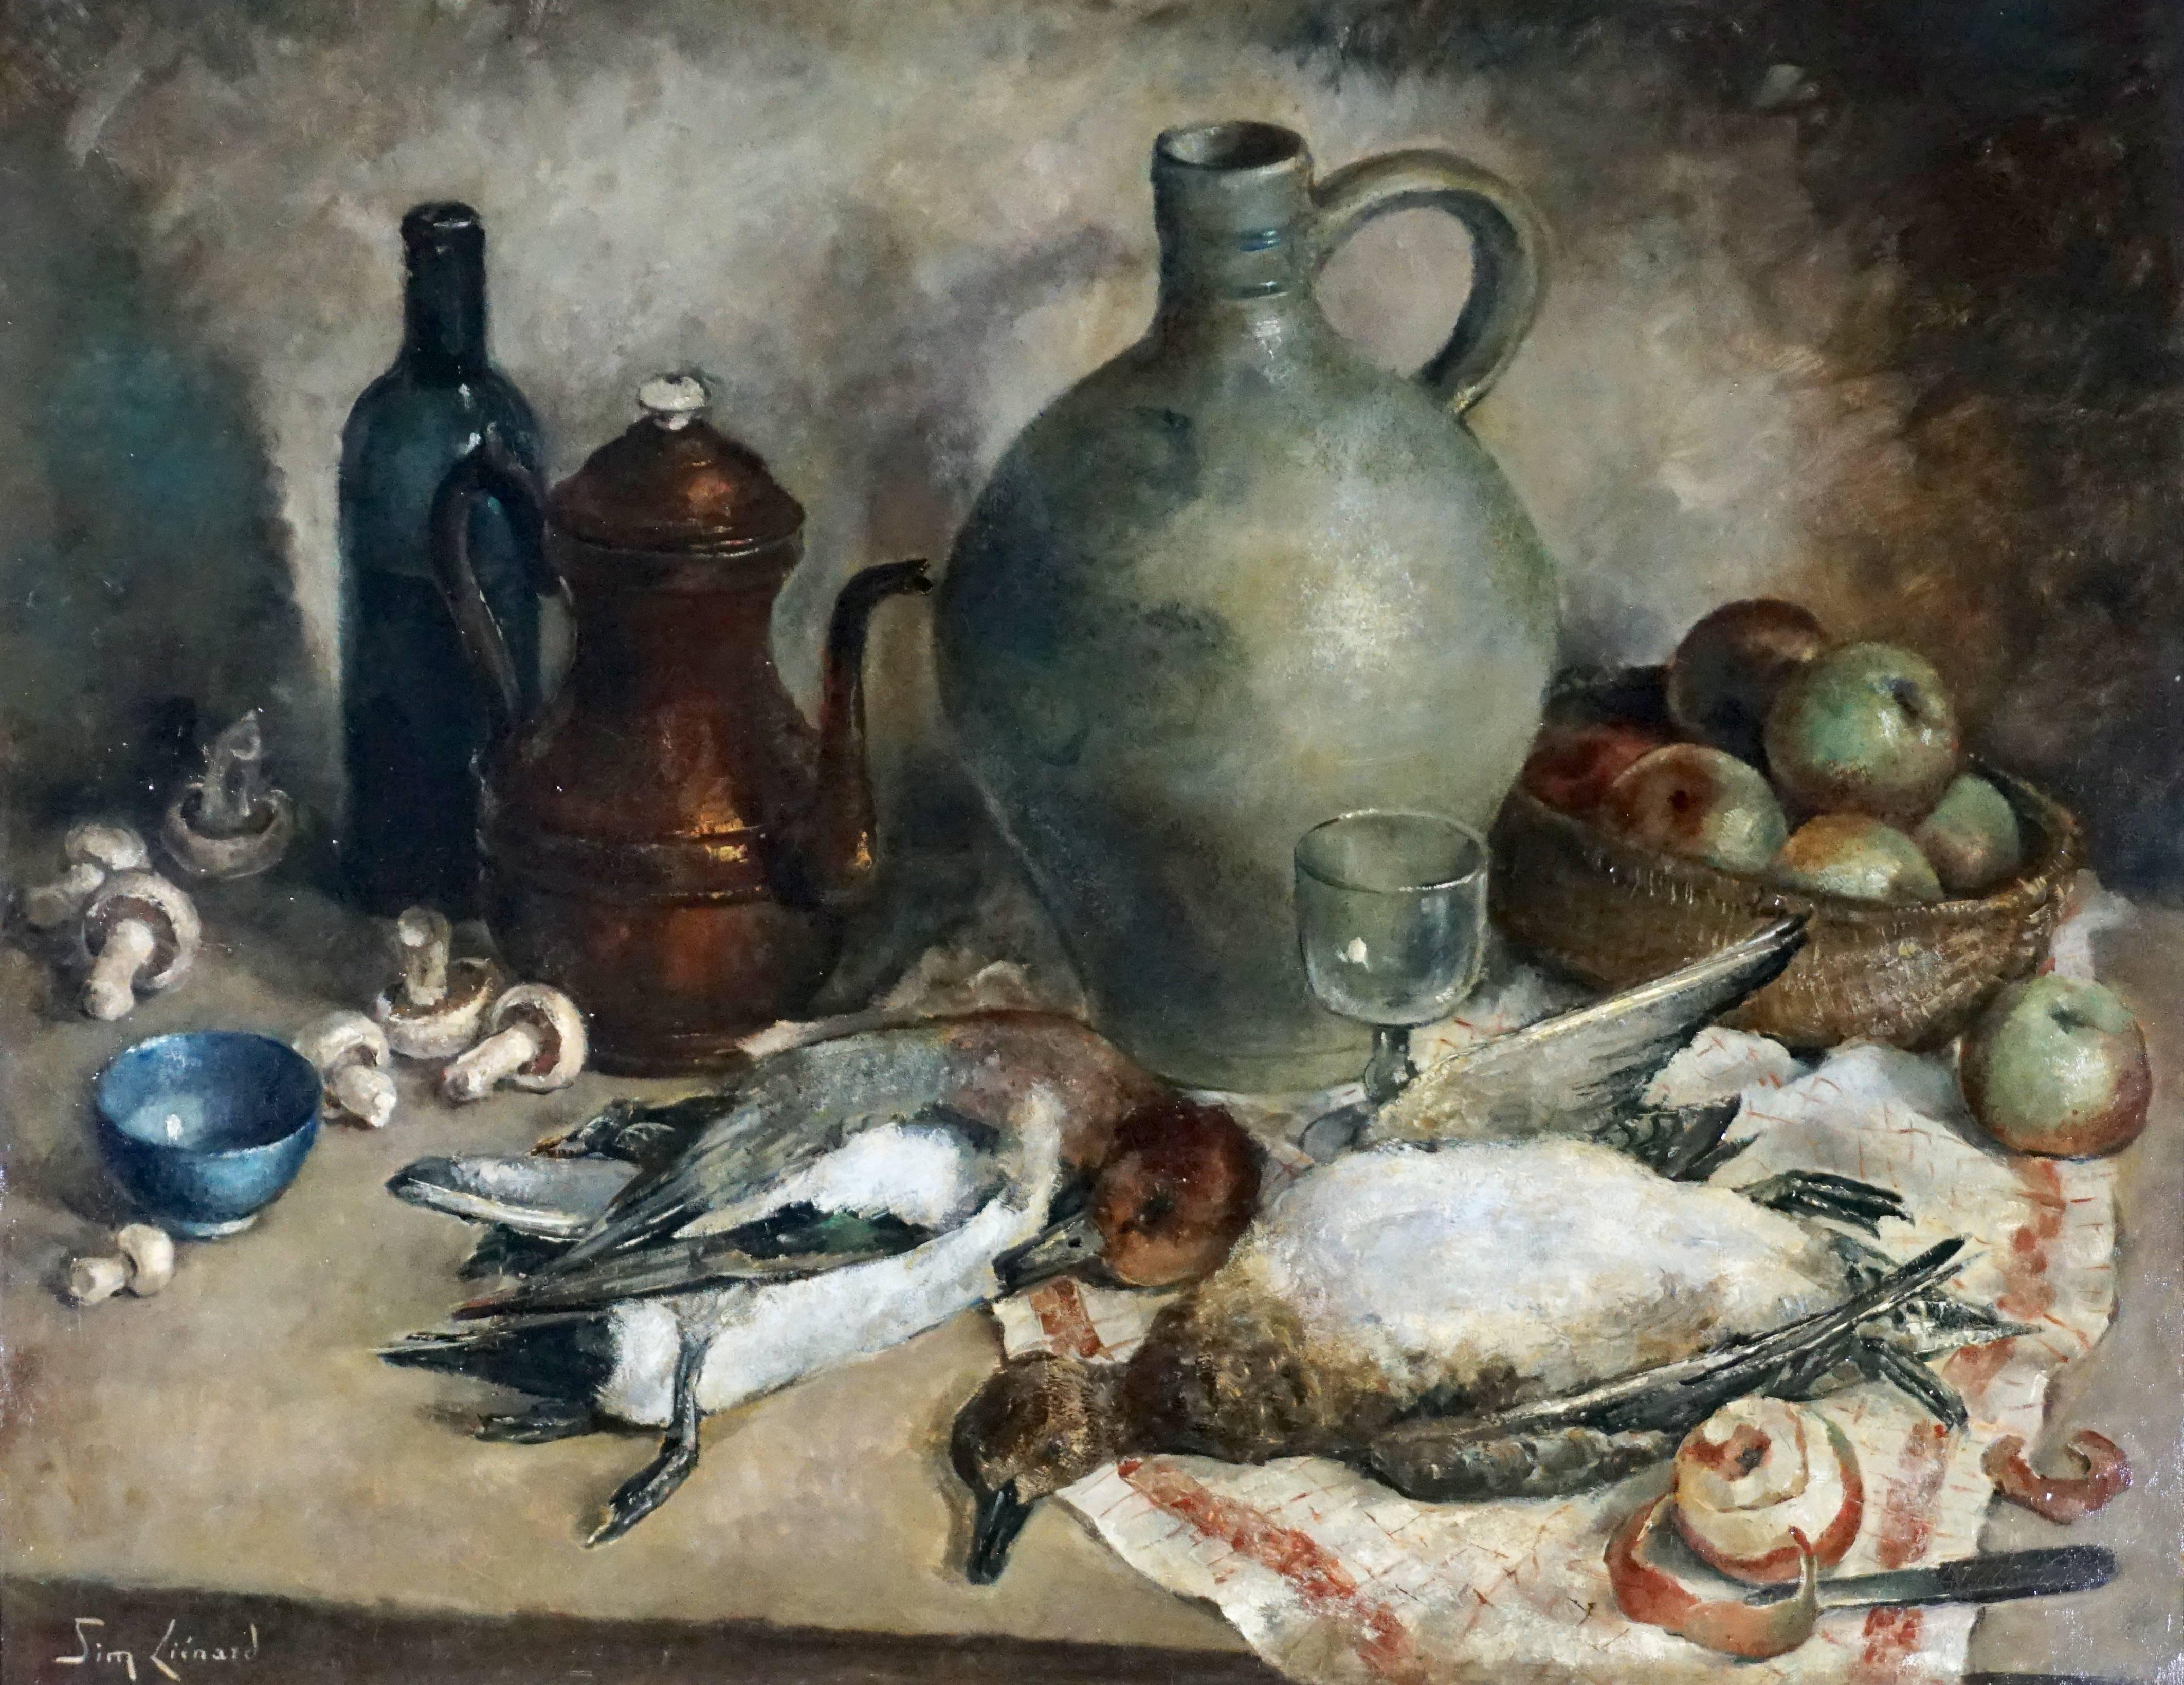 A Spectacular and Striking Simone Lienard (Belgium, 1912-1988), circa 1950 oil on canvas painting of ducks on the kitchen table with wine, mushrooms, apples, pottery jugs and a wine glass with knife. Amazing style and presentation with impressionist